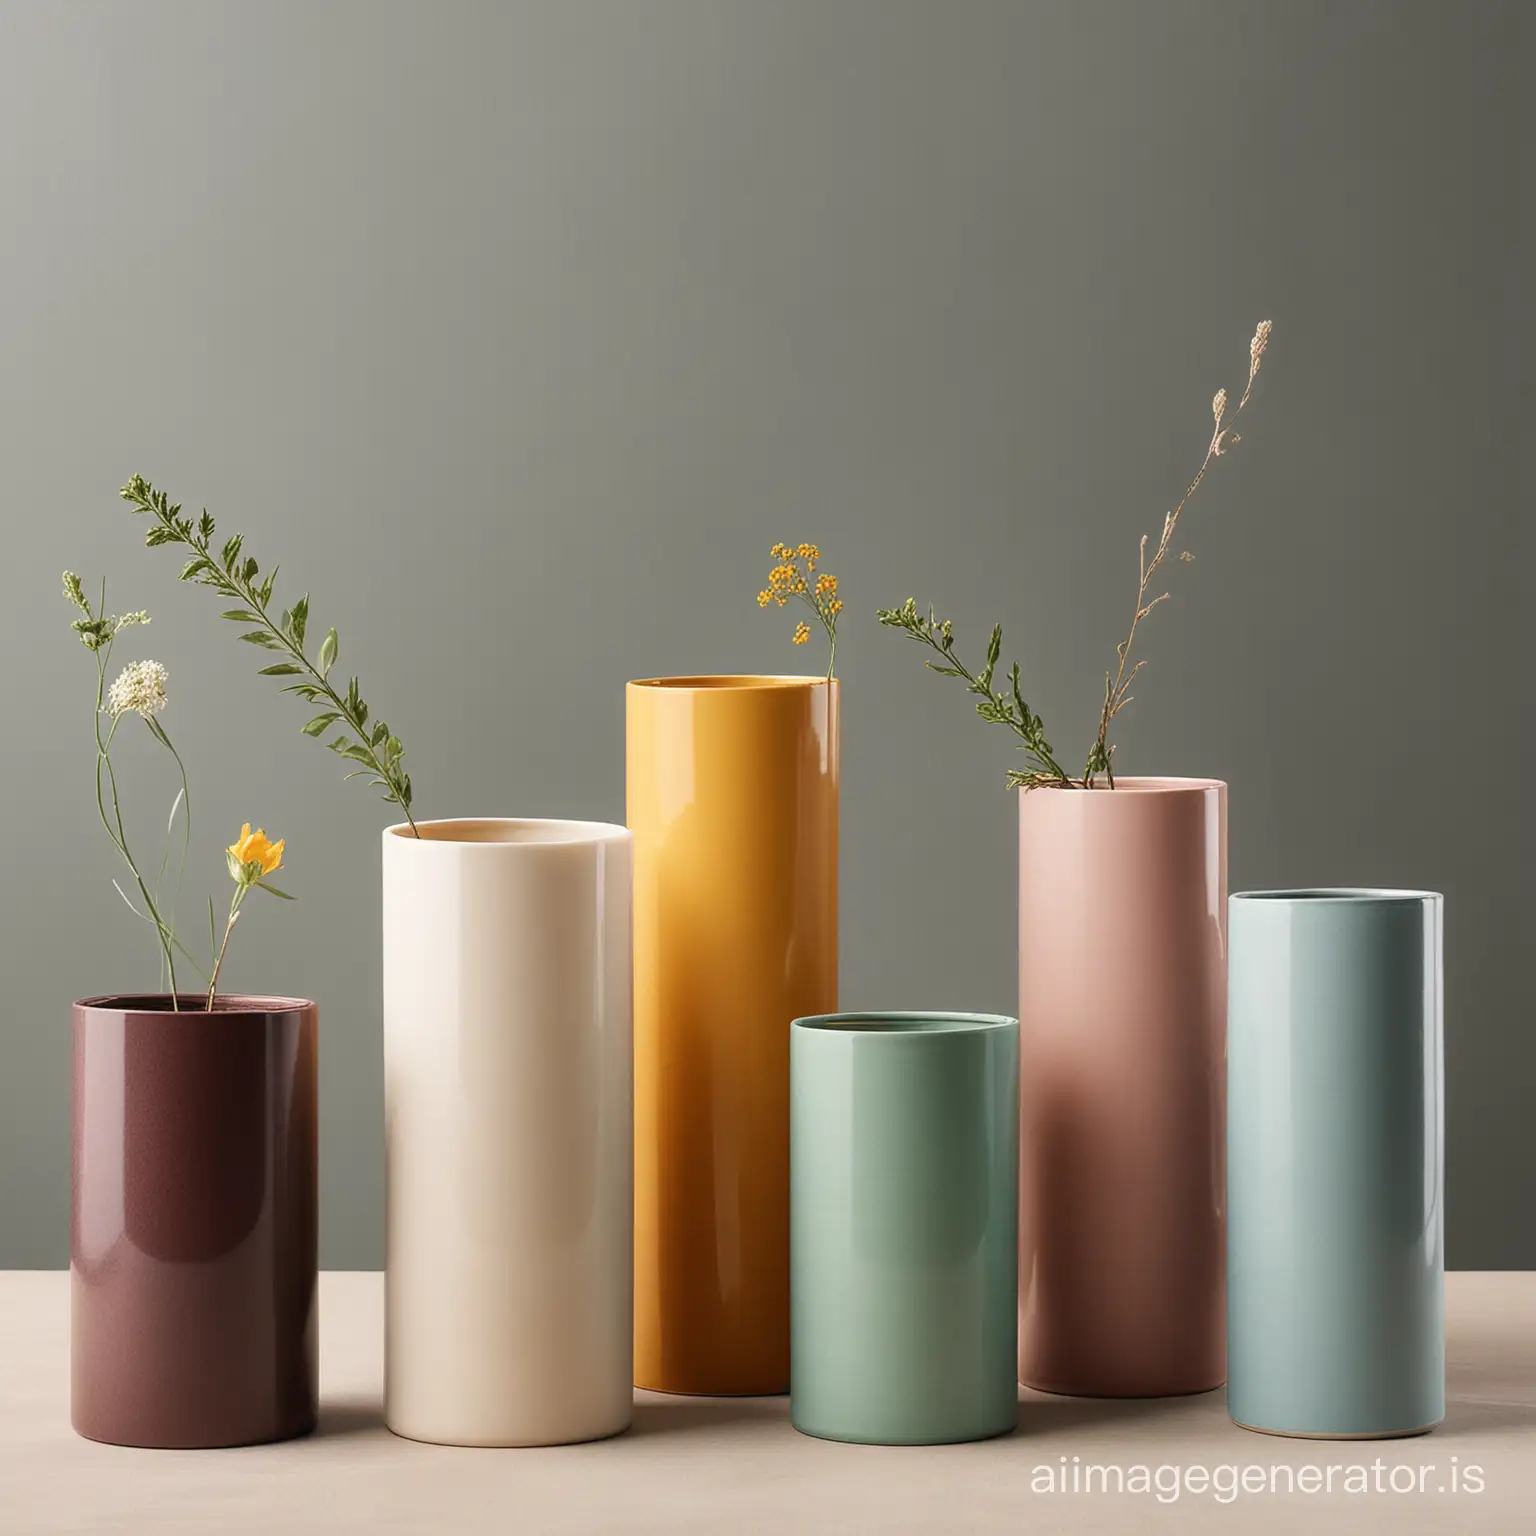 Assorted-Cylinder-Vases-in-Varied-Materials-and-Colors